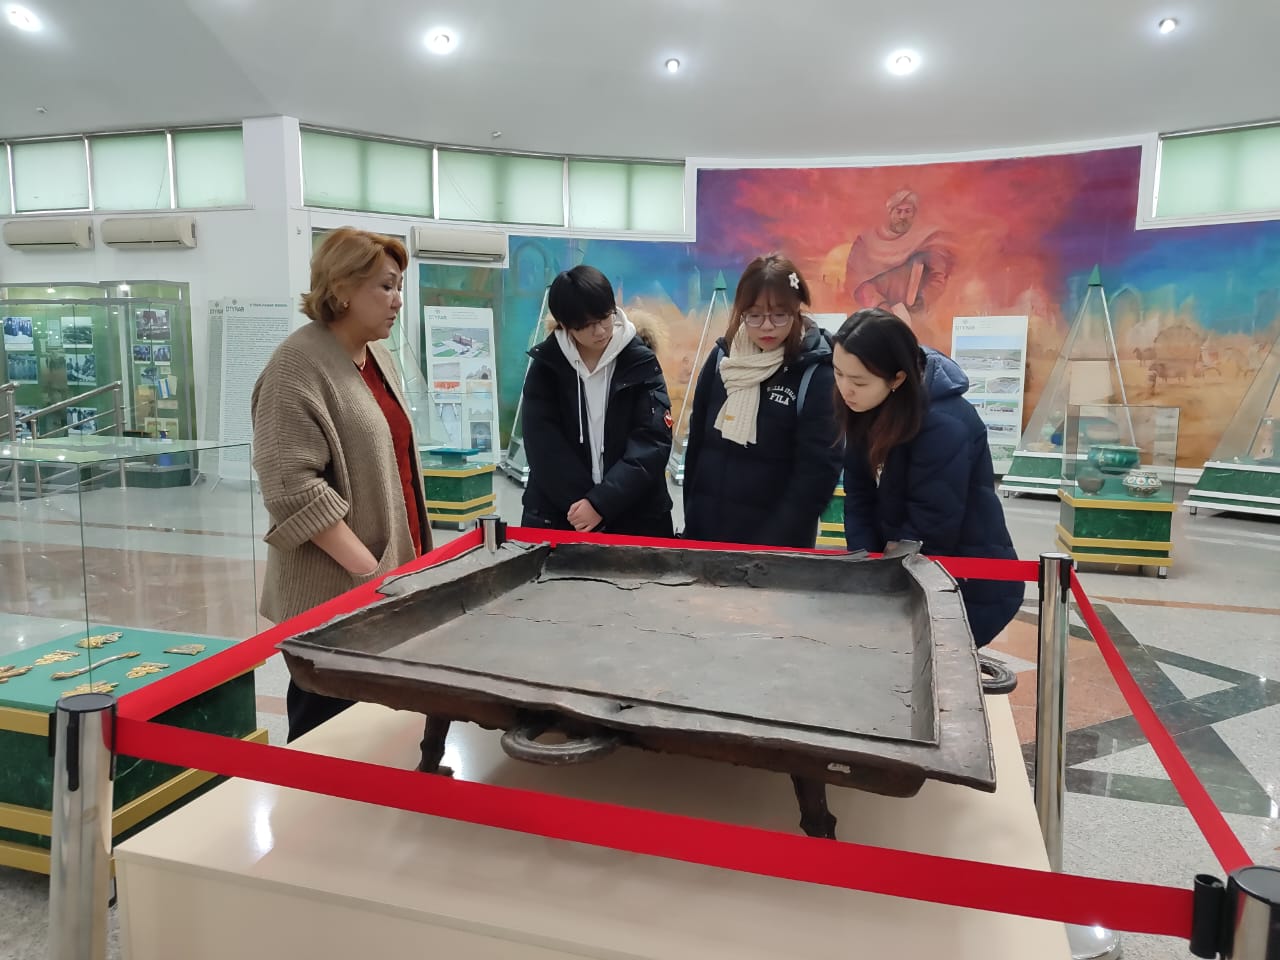 Museum students of the 3rd year of the Chinese Scientific and Pedagogical University visited the museum